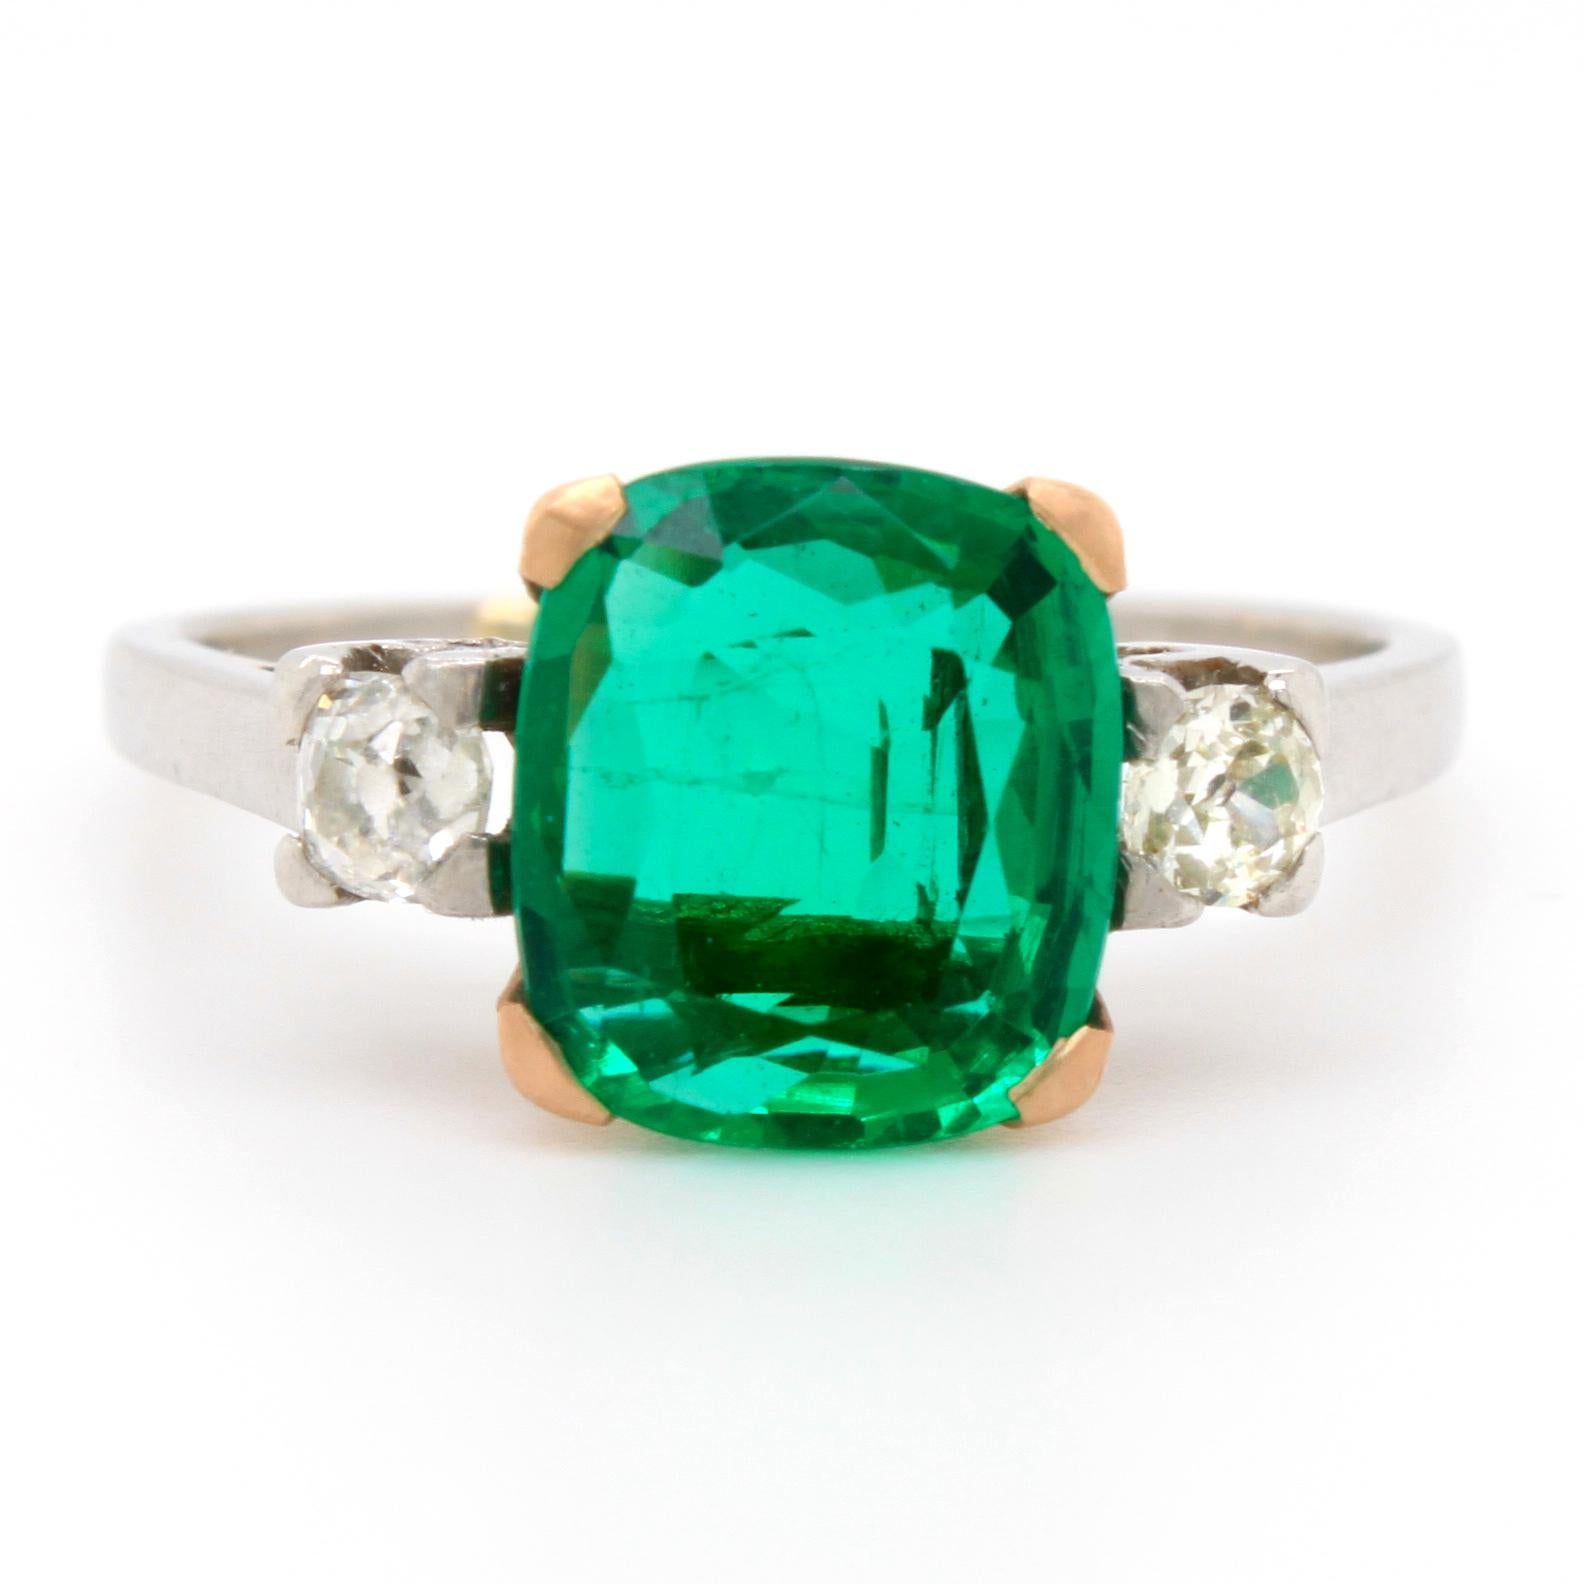 A rare emerald, from the Panjshir valley in Afghanistan, and diamond ring in yellow and white gold. The emerald weighs 2.15 carats and is accompanied with a gemological certificate by DSEF stating that the emerald is from Afghanistan and has minor